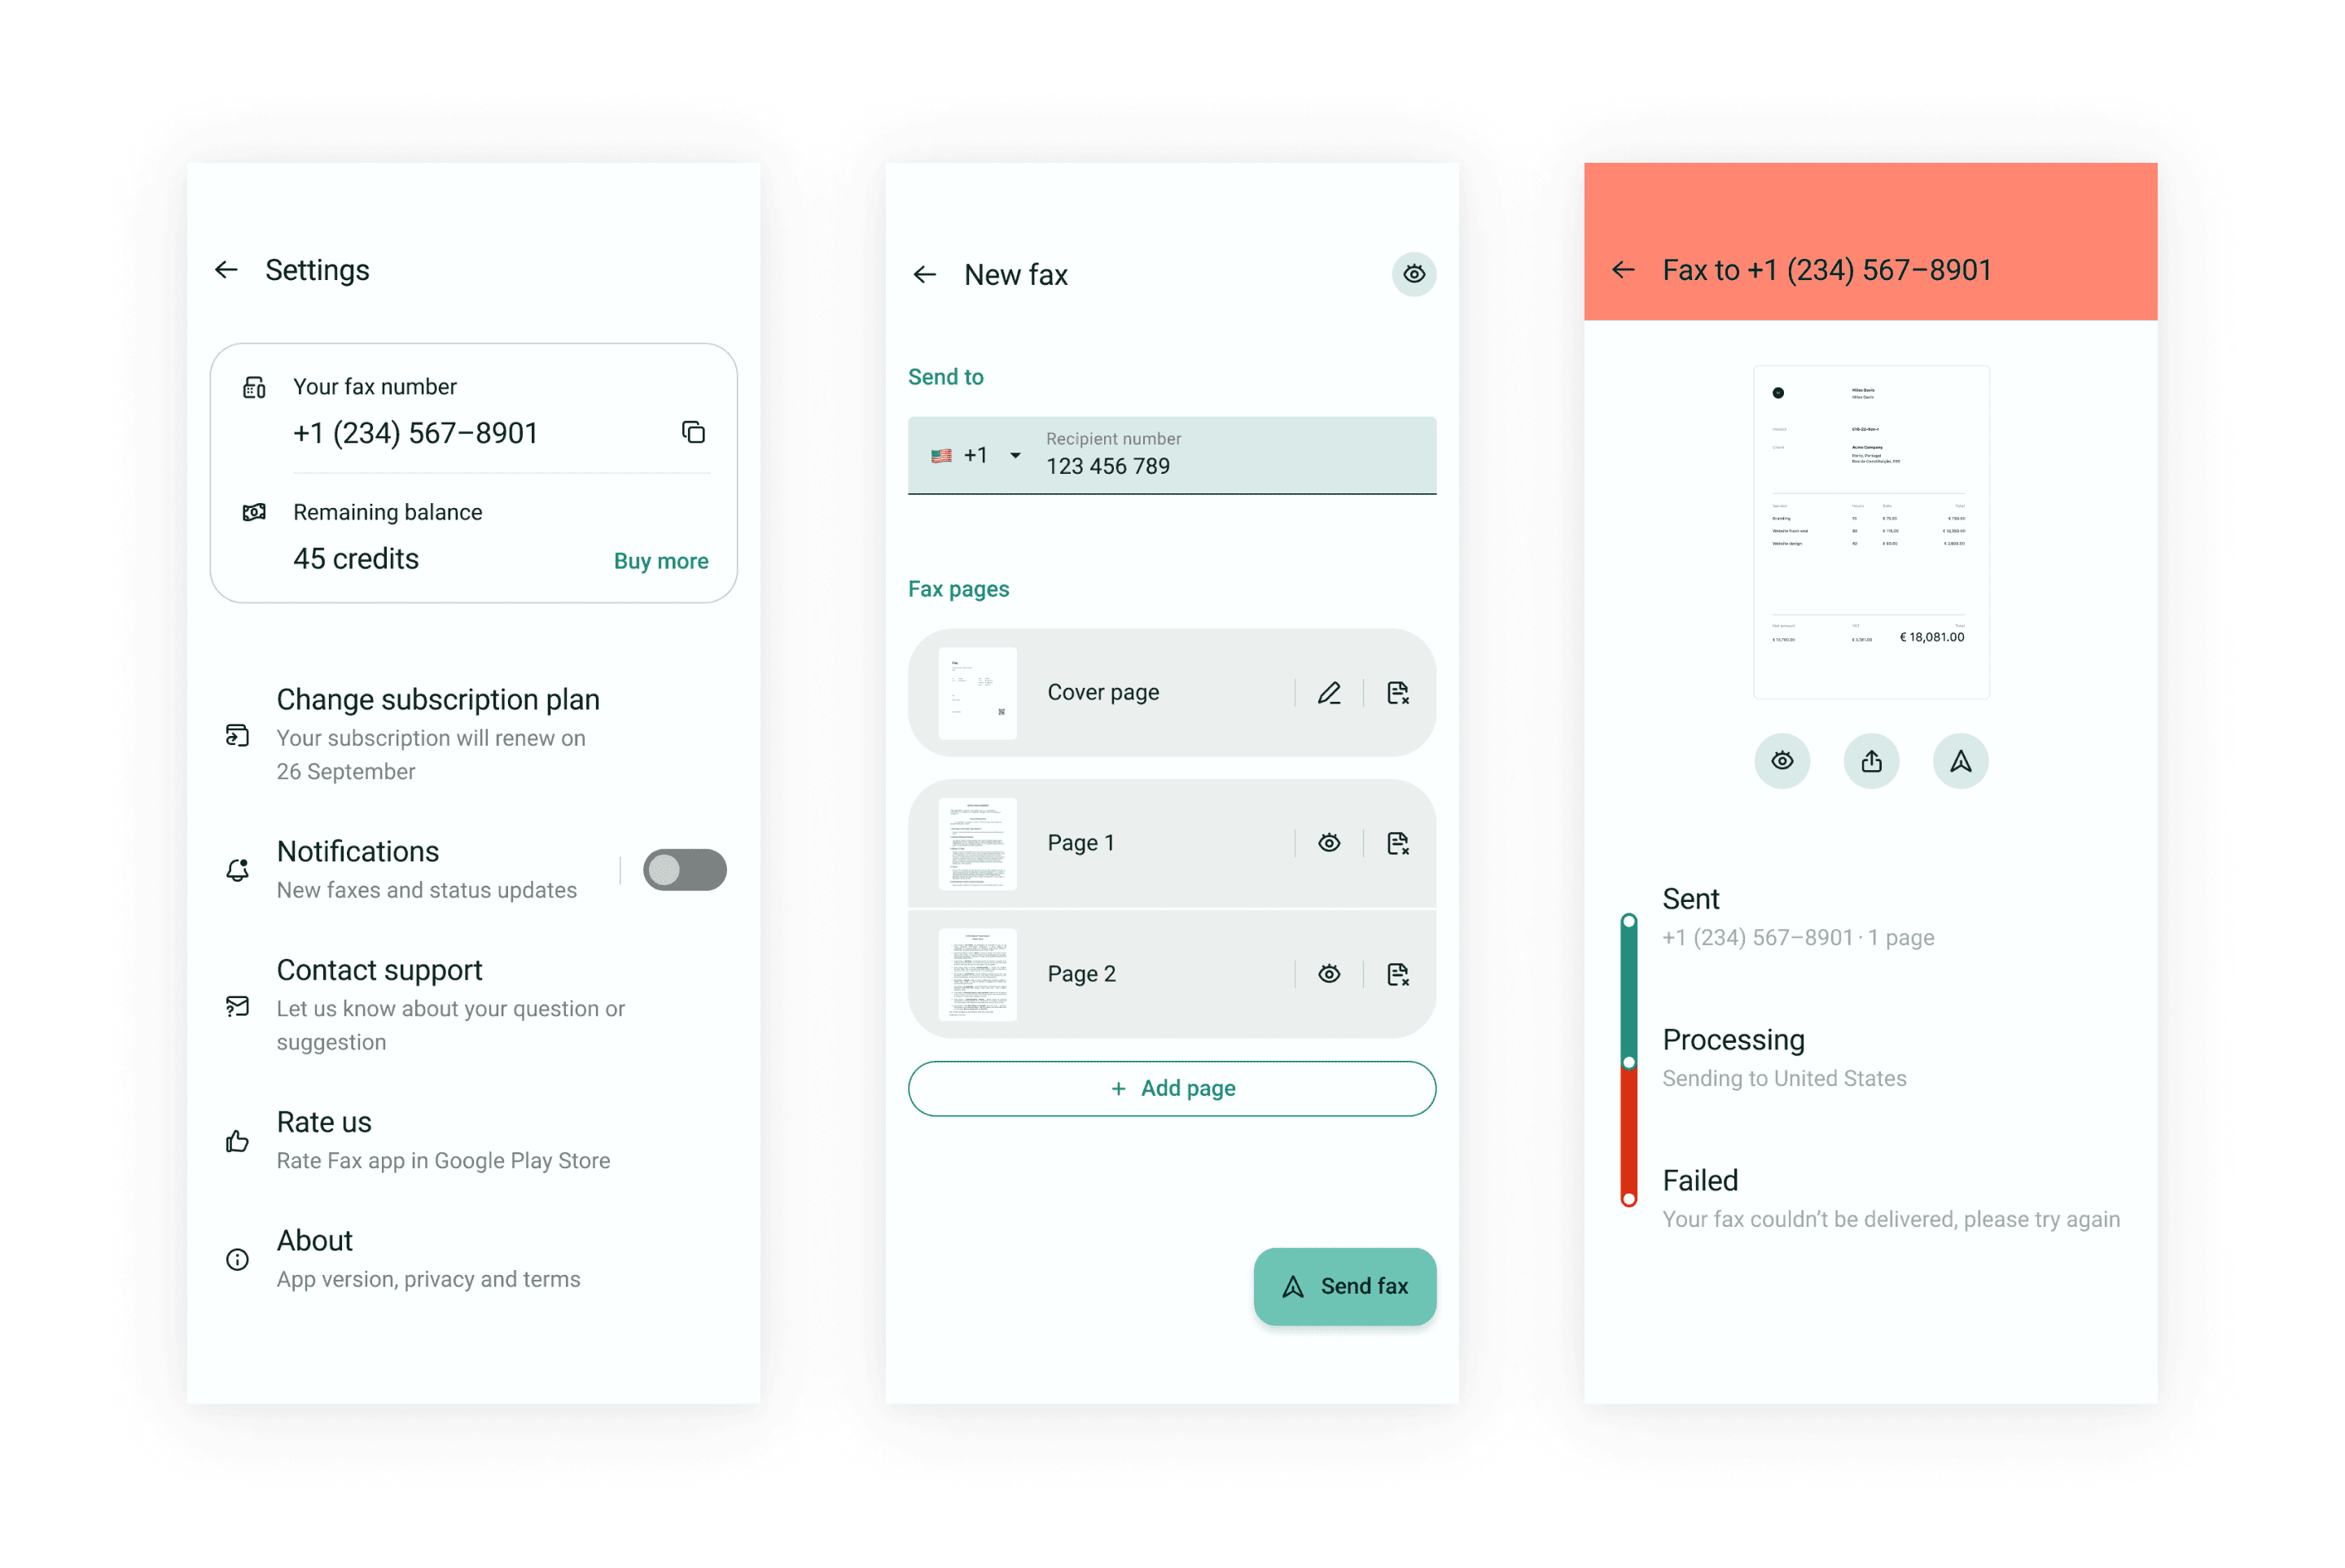 Three screens of the Android Fax app: app settings, new fax composition and failed fax status